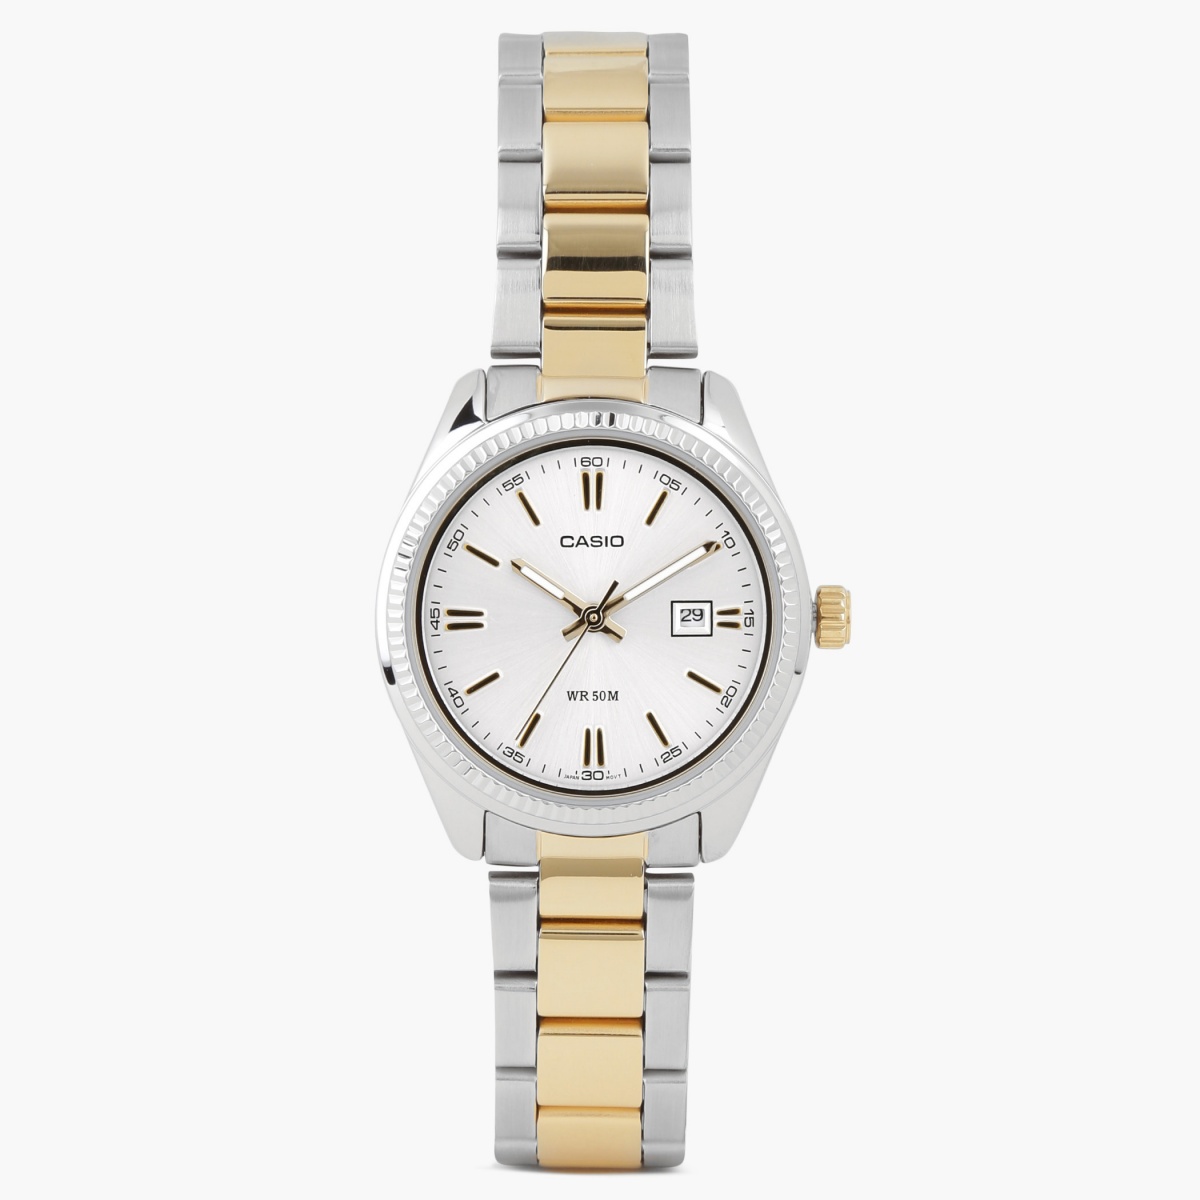 CASIO Women Analog Watch with Metal Strap - A478